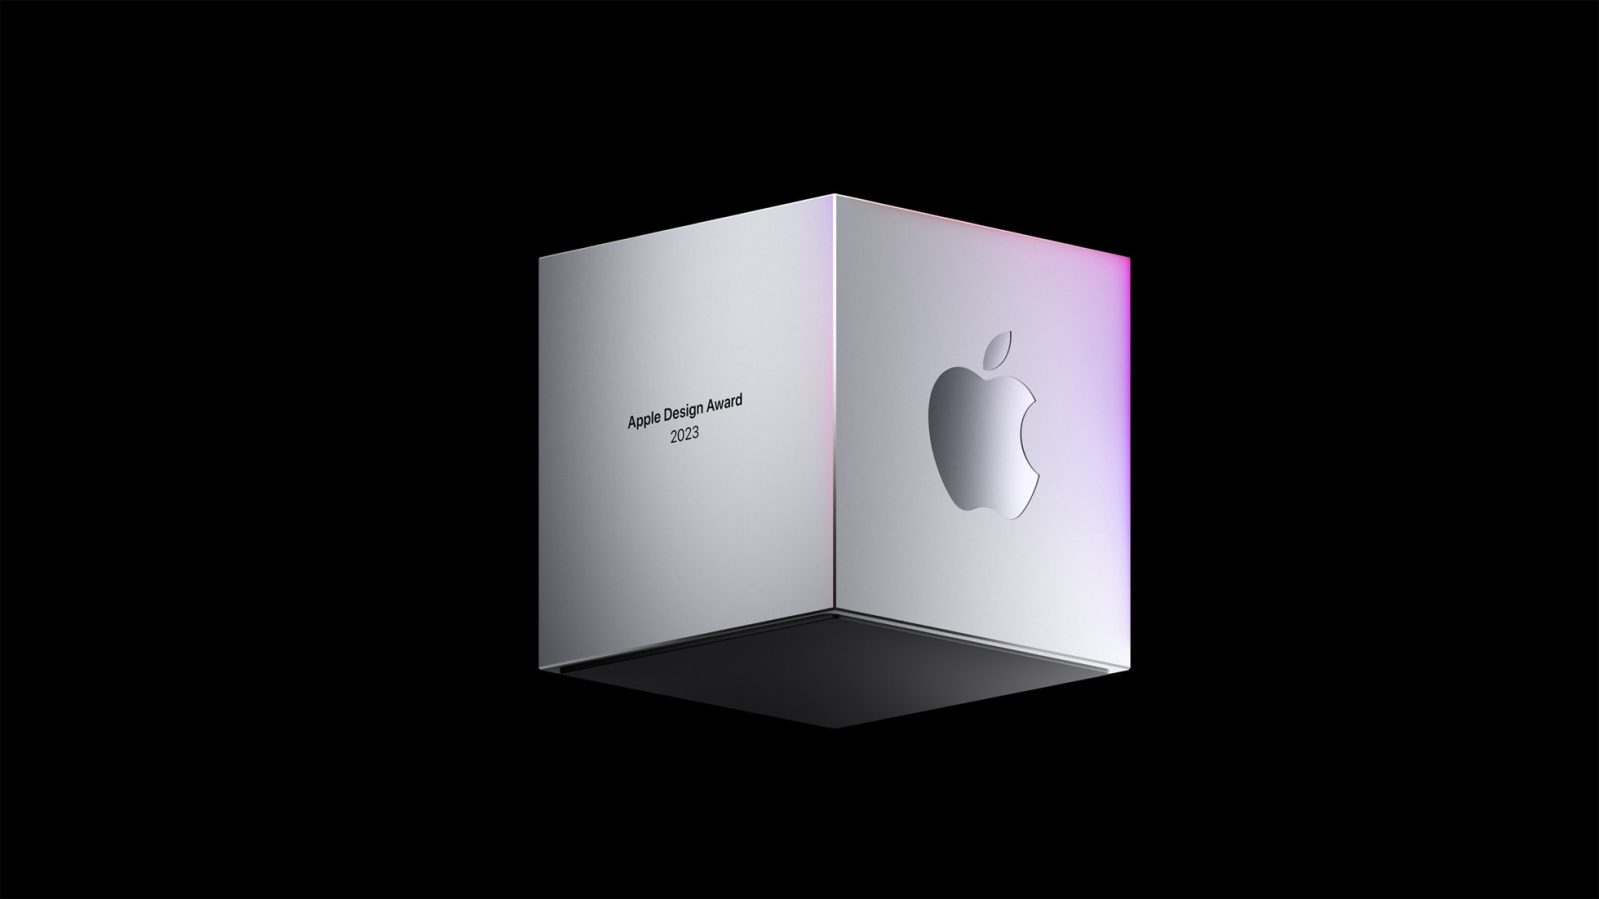 Here are the winners of the 2023 Apple Design Awards